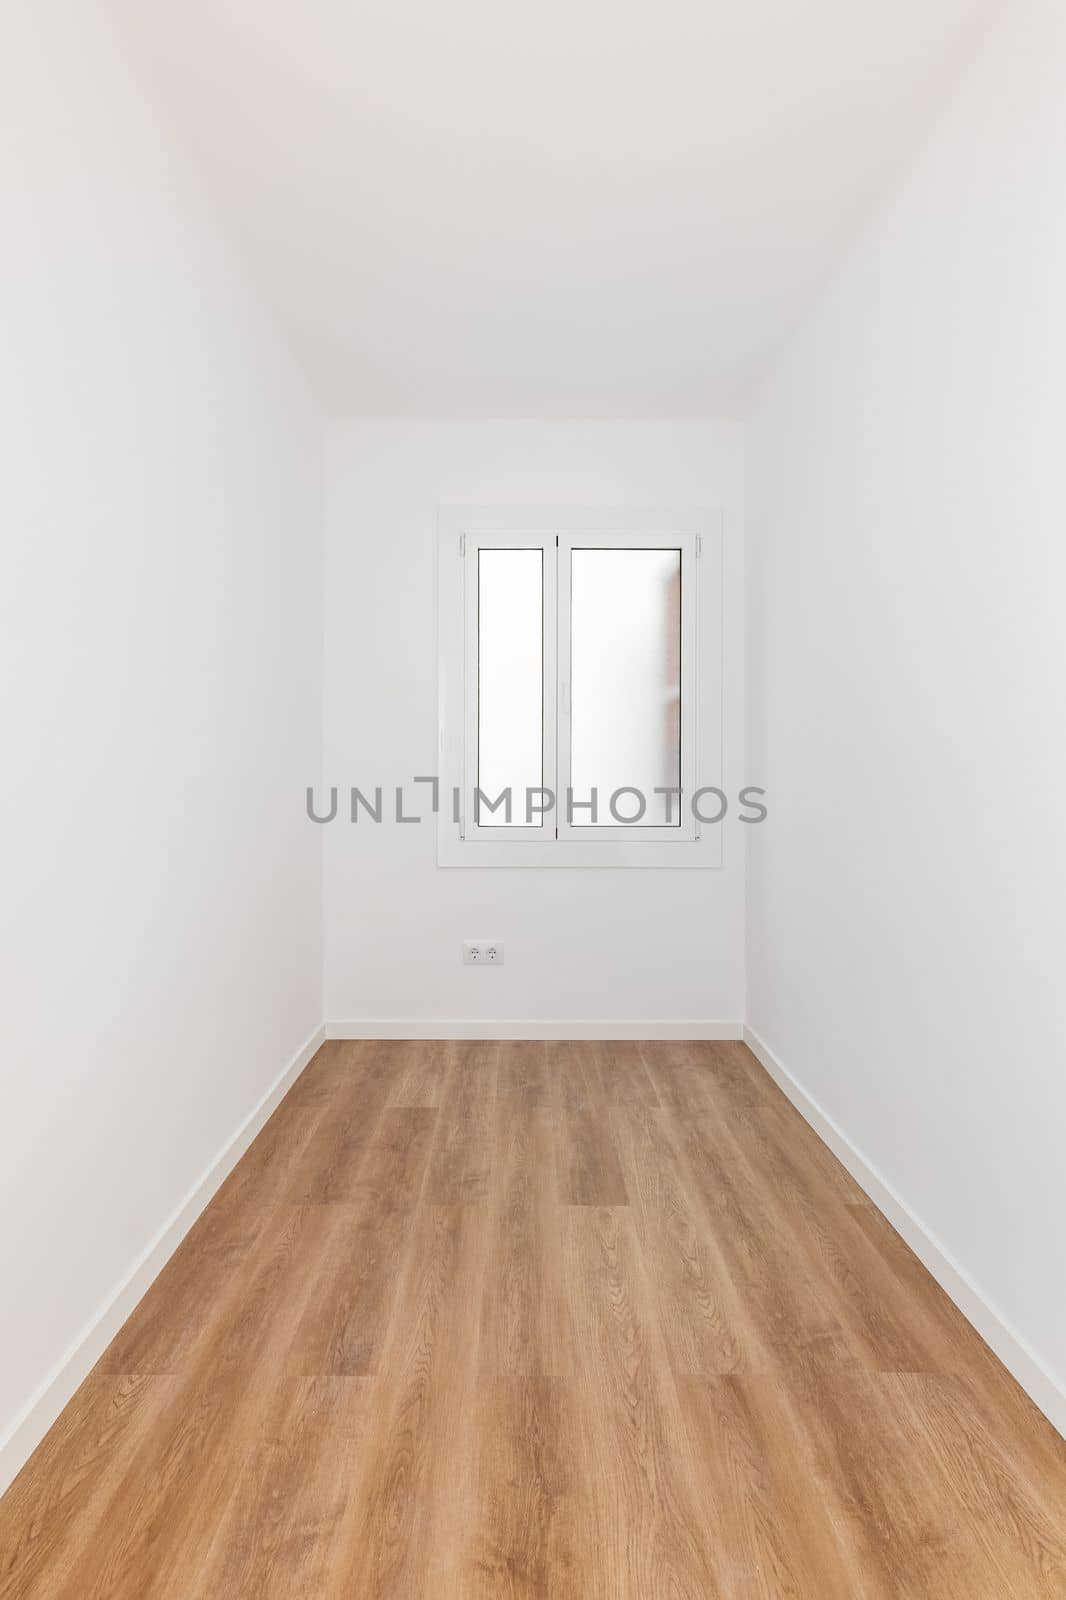 Long narrow rectangular room with white walls and wooden parquet, well lit by daylight from frosted glass window from prying eyes. Several sockets for electrical appliances are built into wall. by apavlin